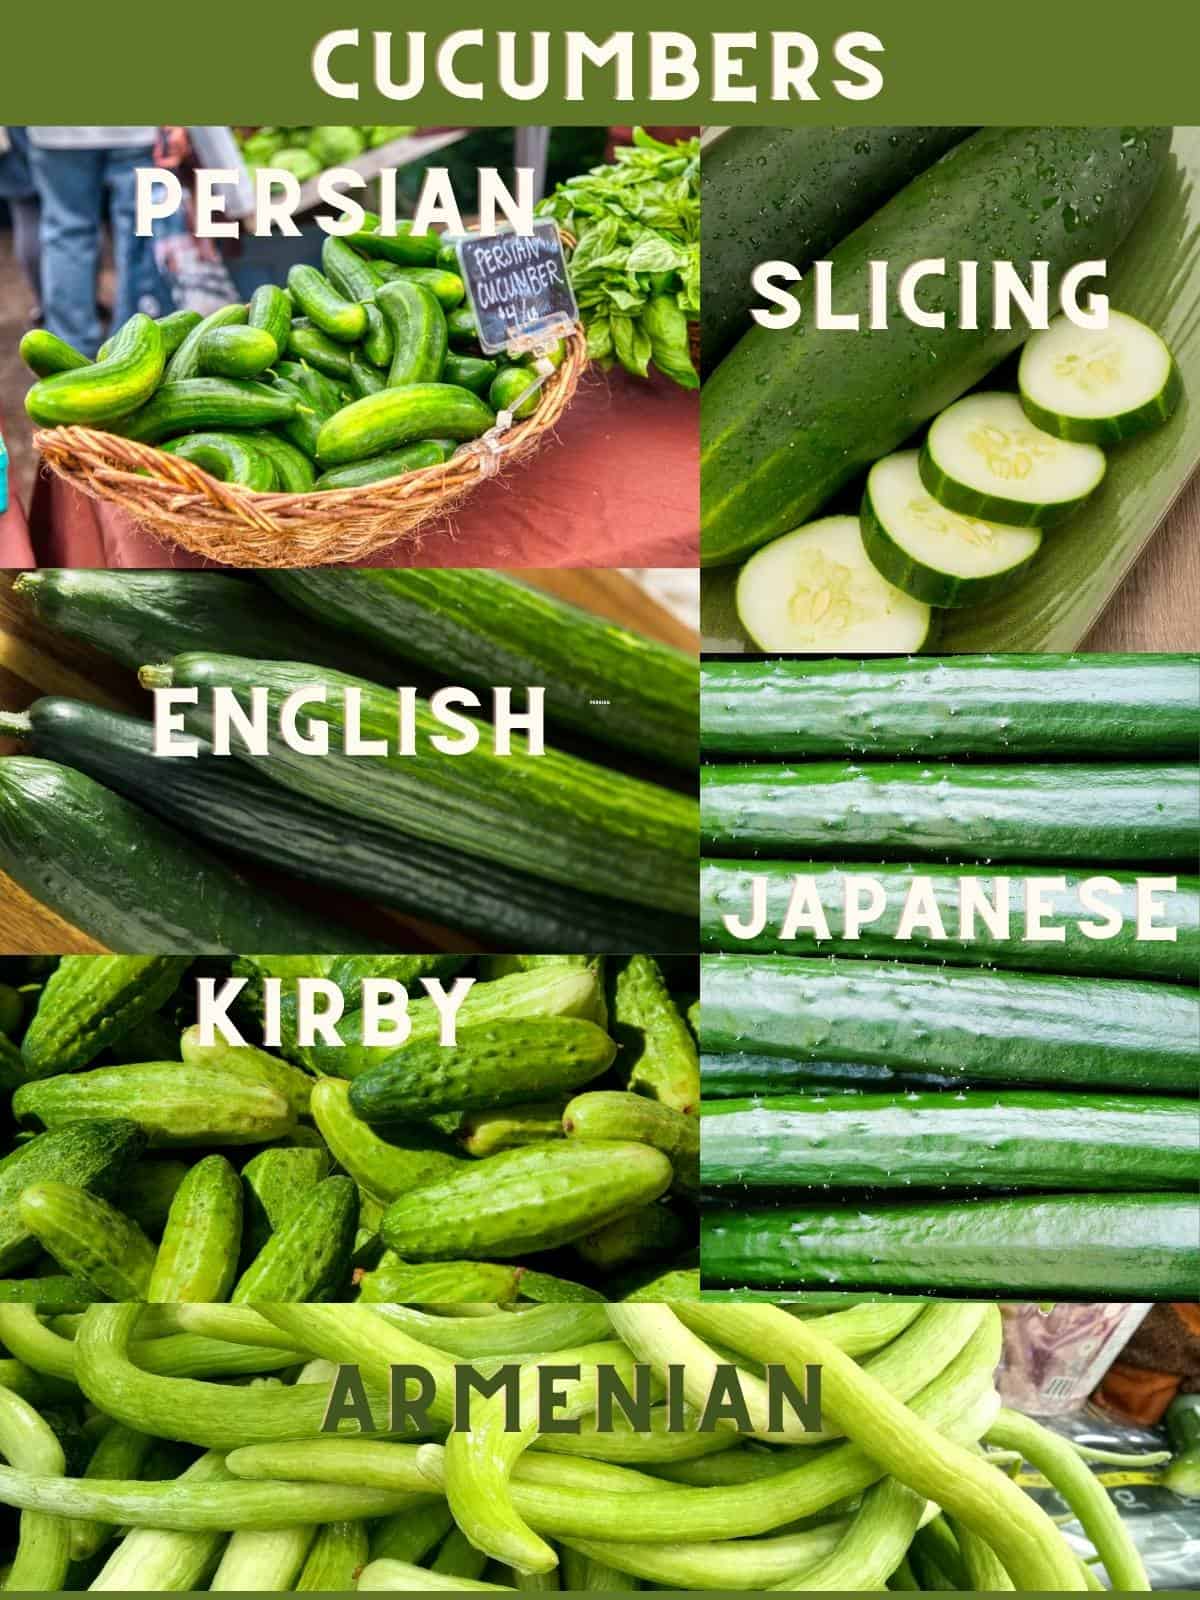 An Image collage of different types of cucumbers